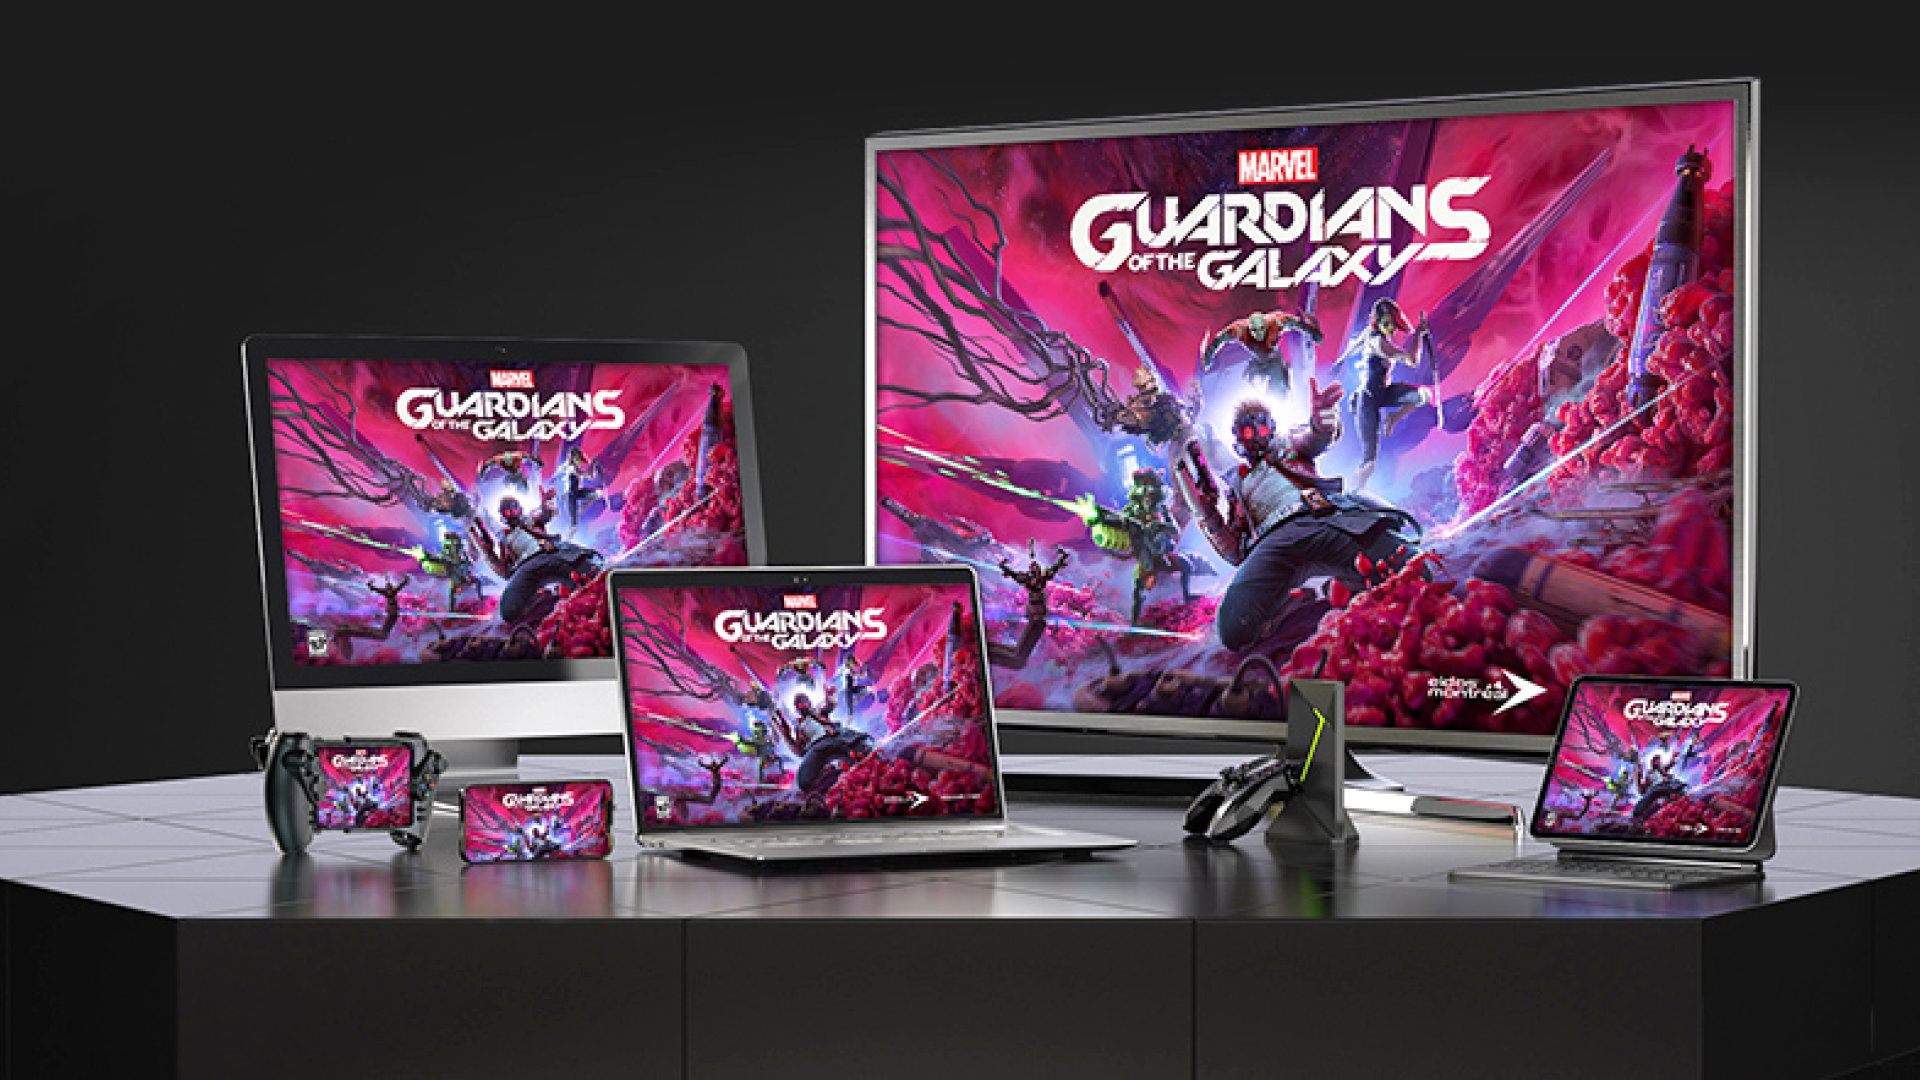 Guardians of the Galaxy is bundled with Nvidia RTX gaming PCs and laptops